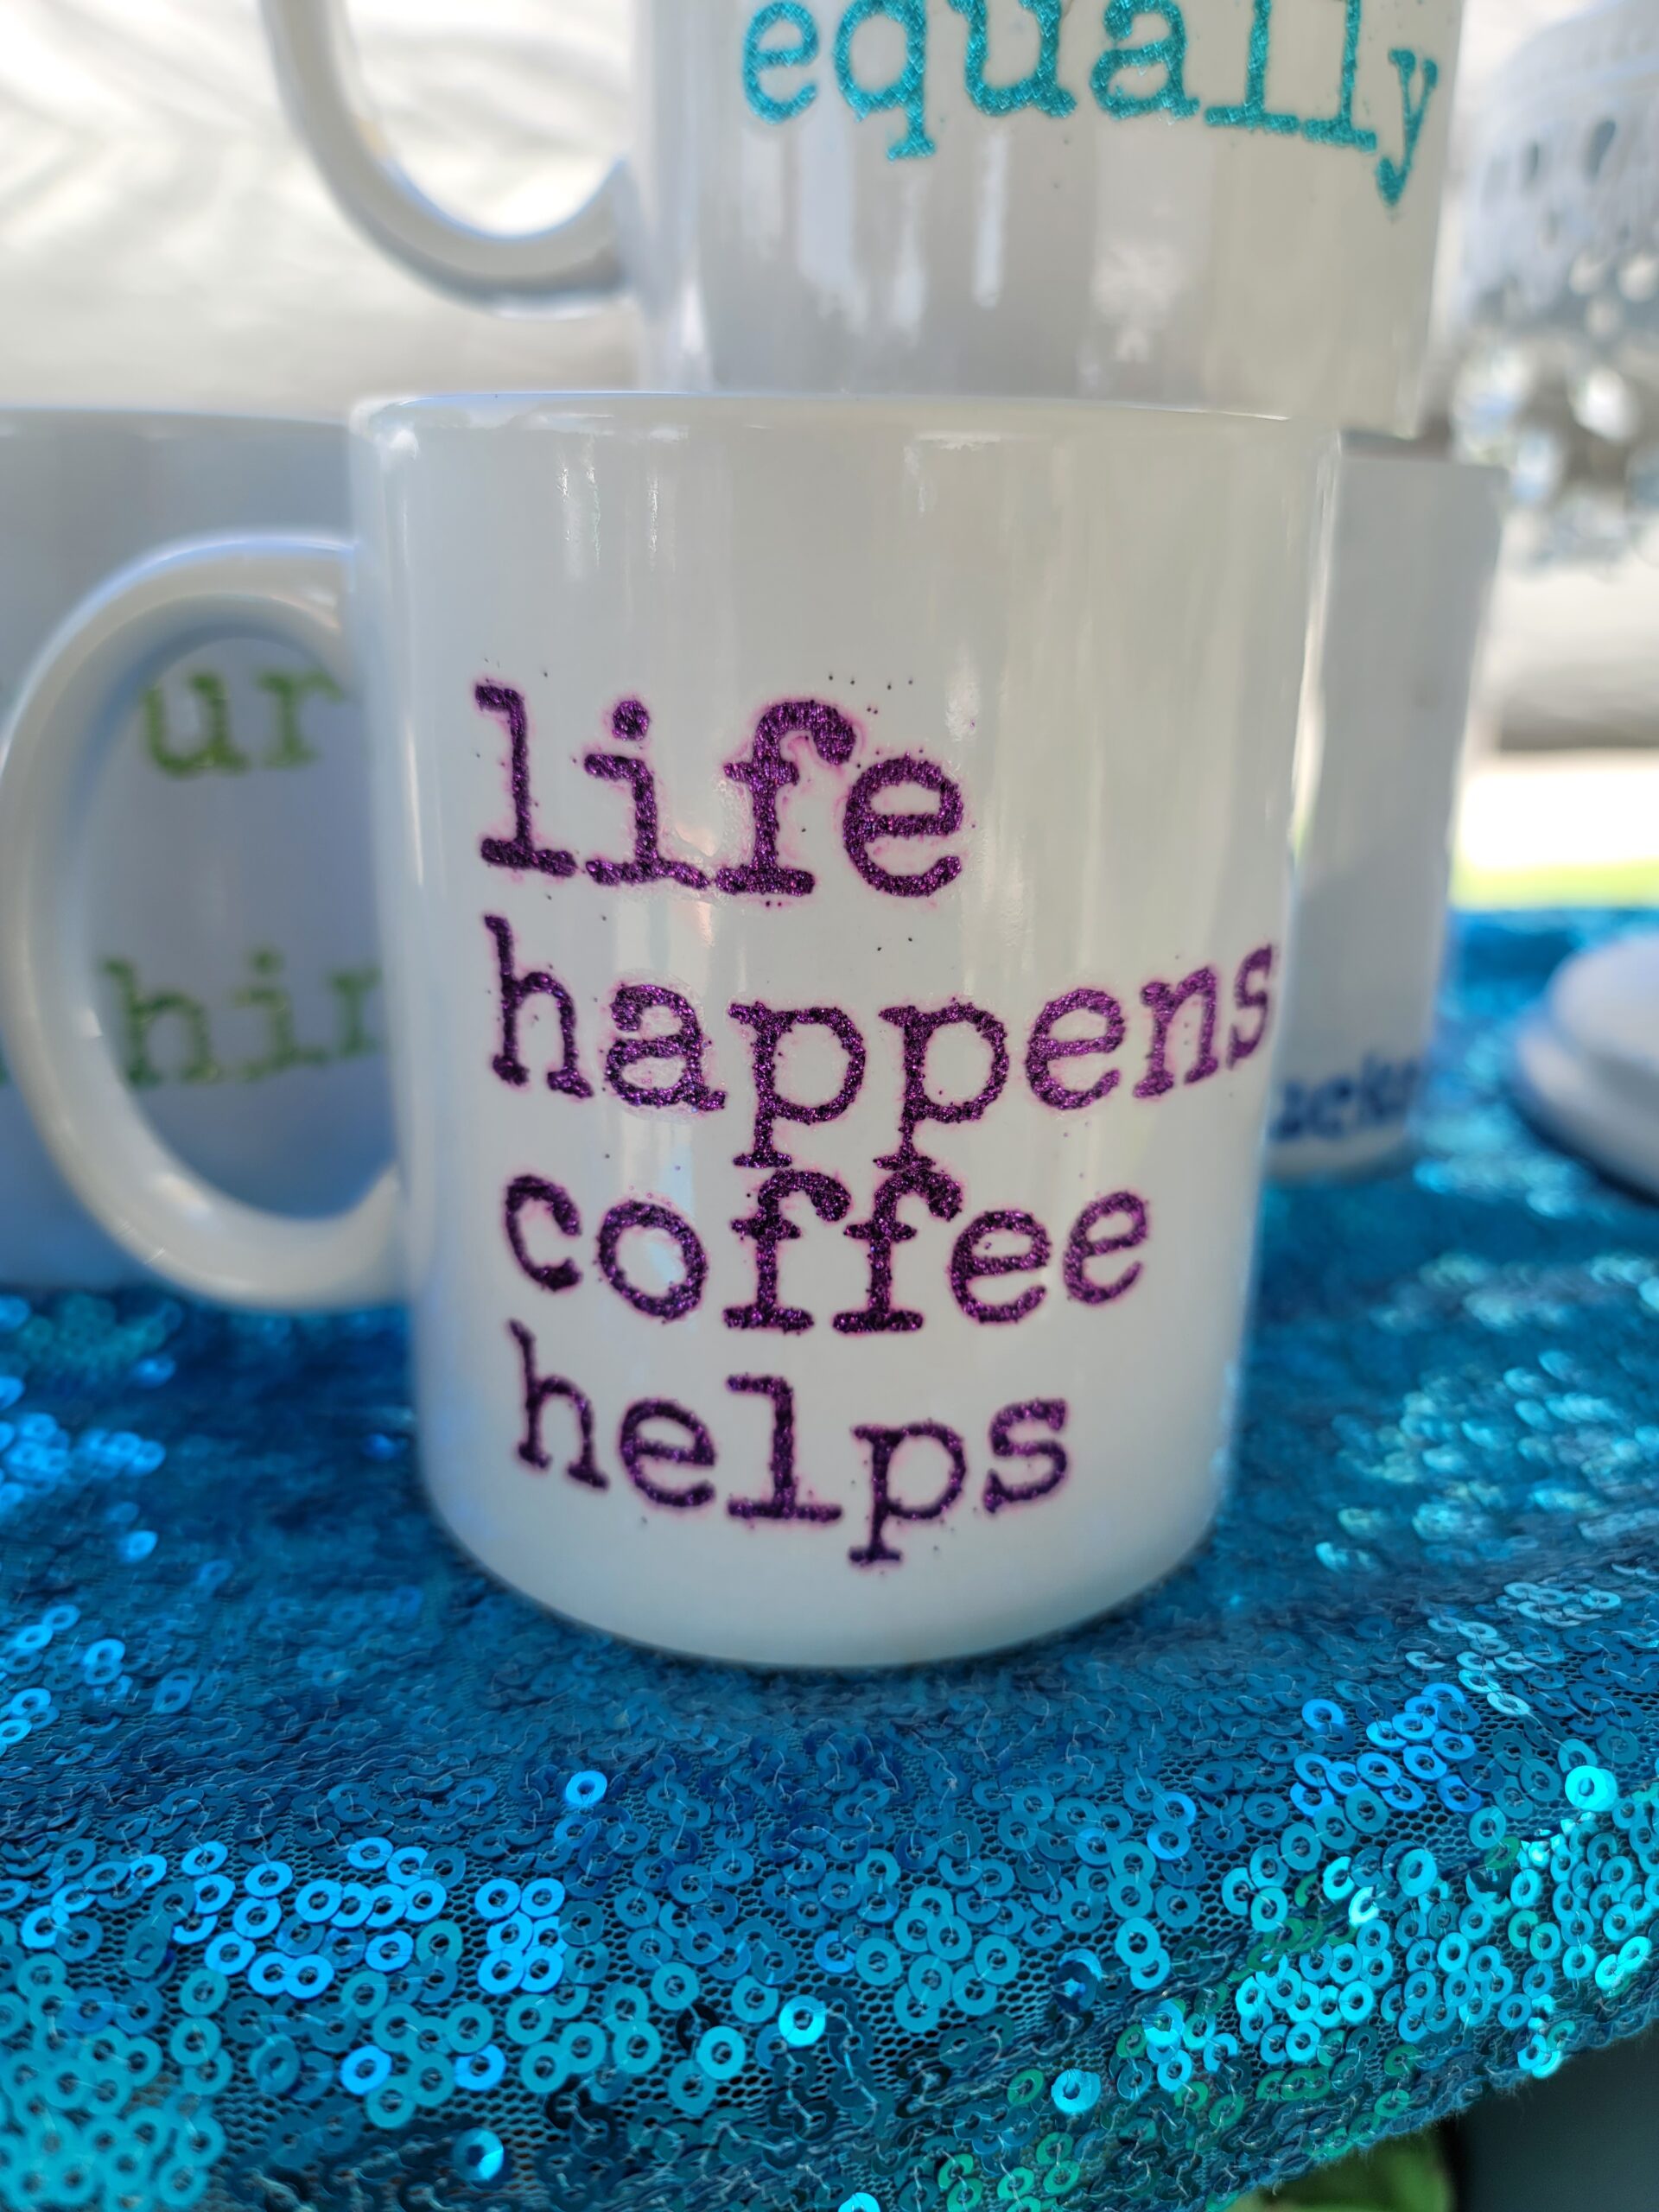 malarkey's first vendor fair exposed - life happens coffee helps - coffee cup